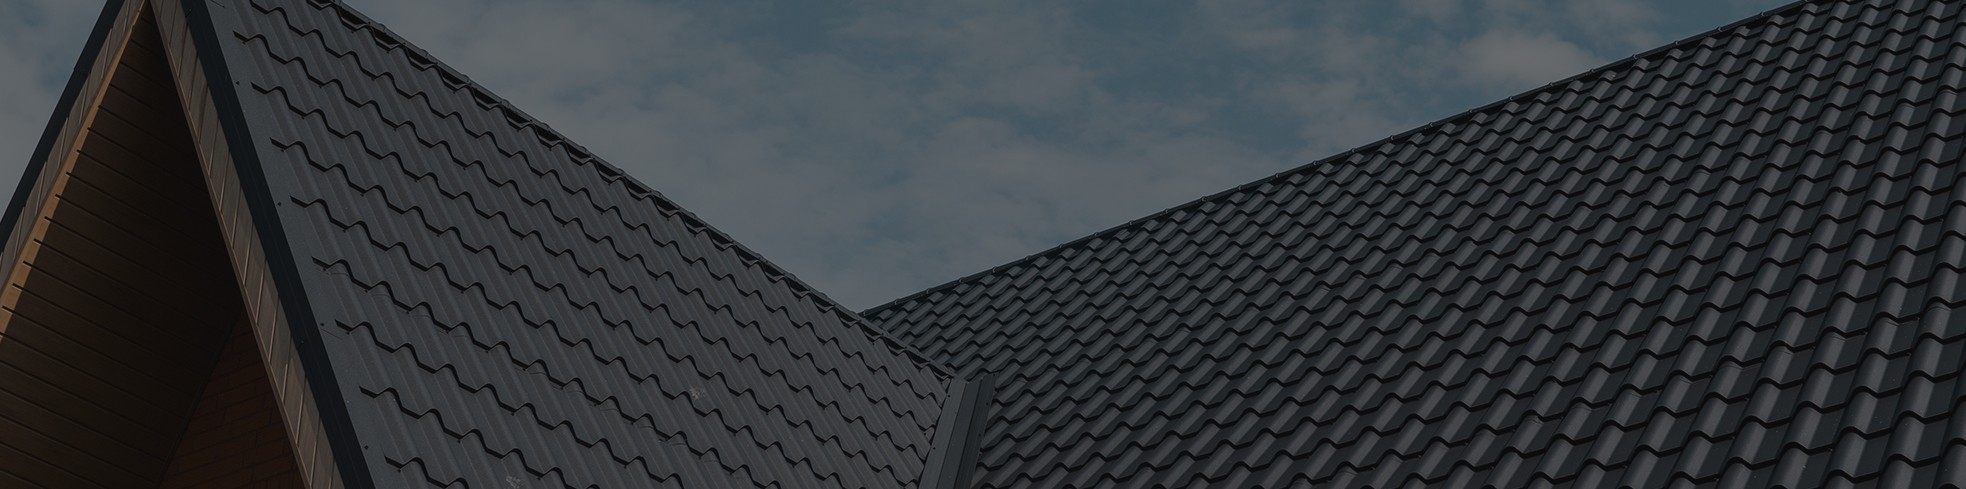 Our roofing specialists are highly trained, full-time Infinity Roofing employees, never sub-contractors.